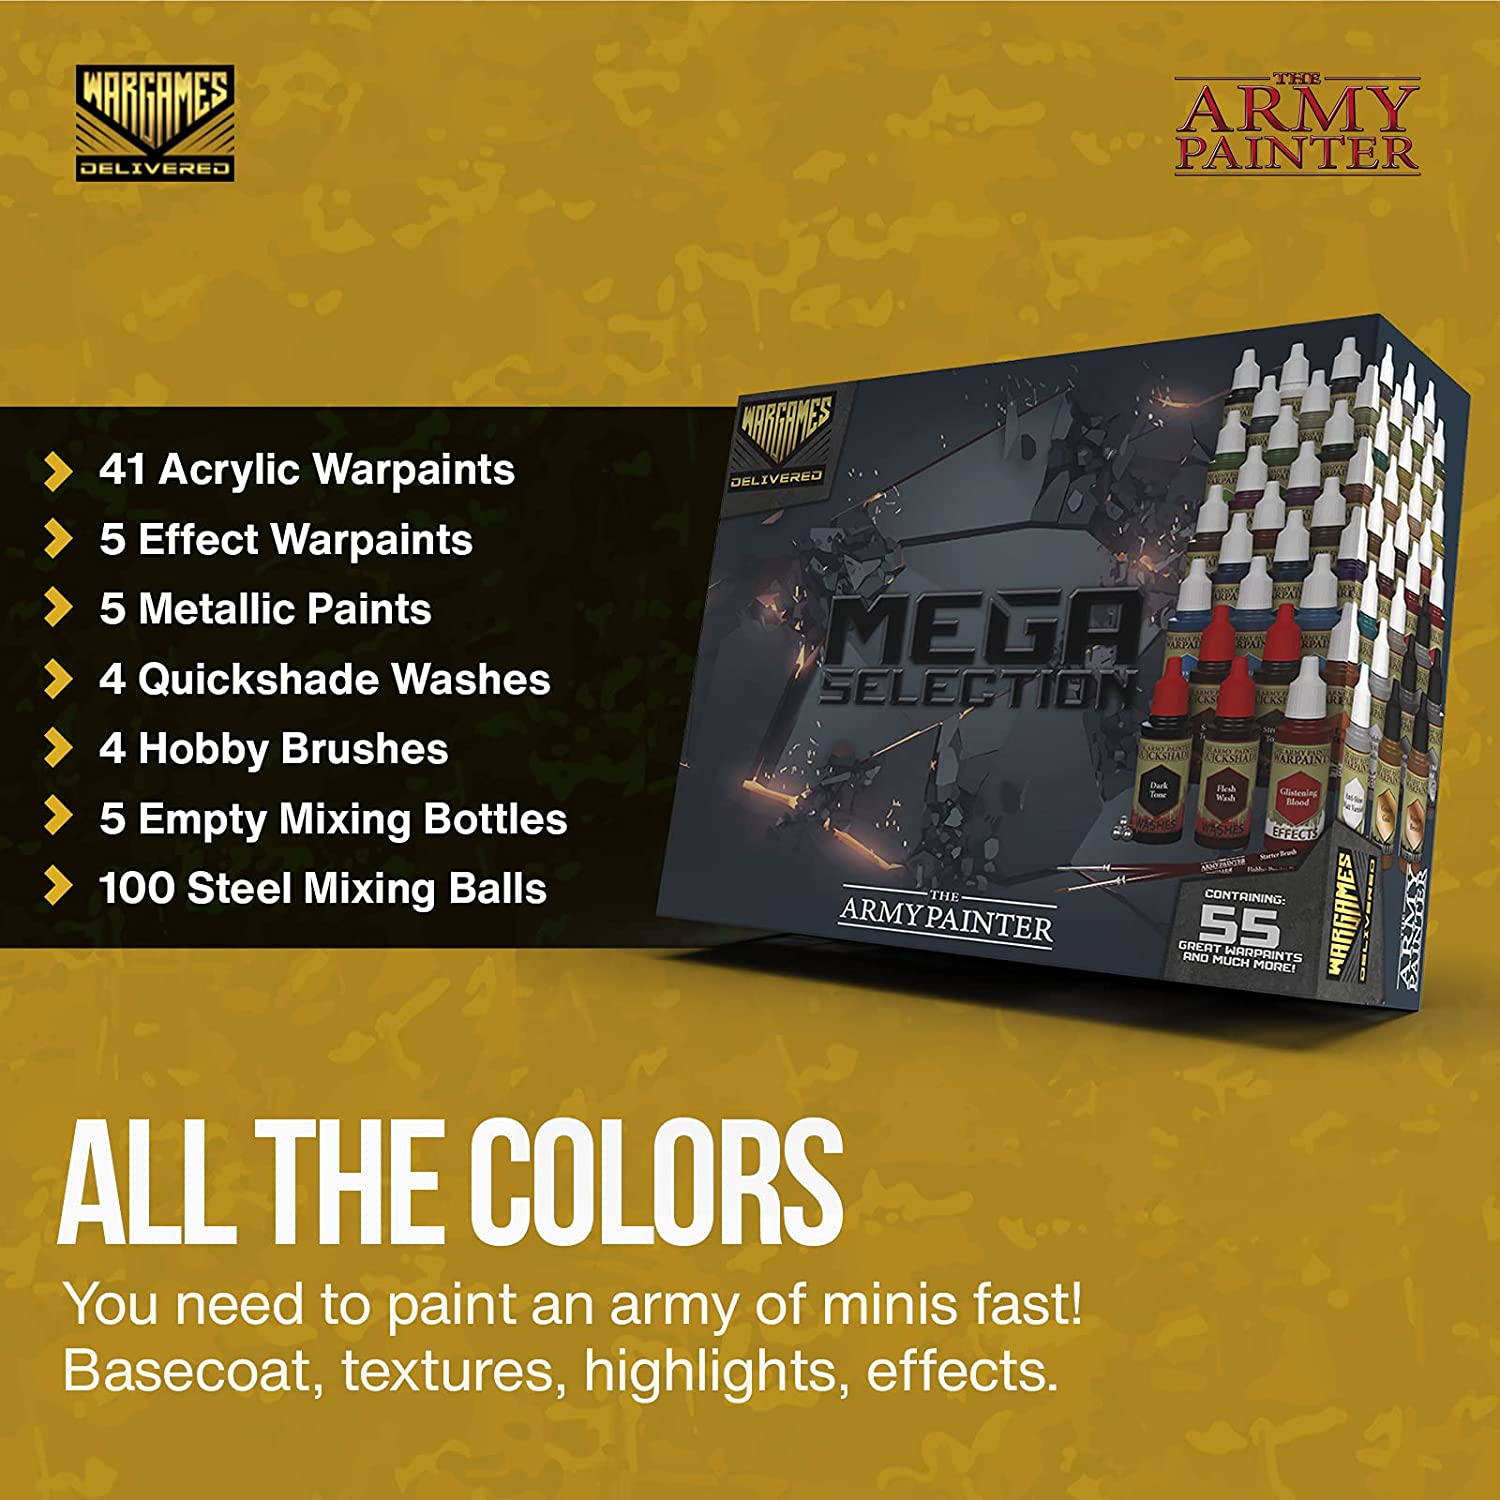 The Army Painter Warpaints Review for Miniatures & Wargames Models